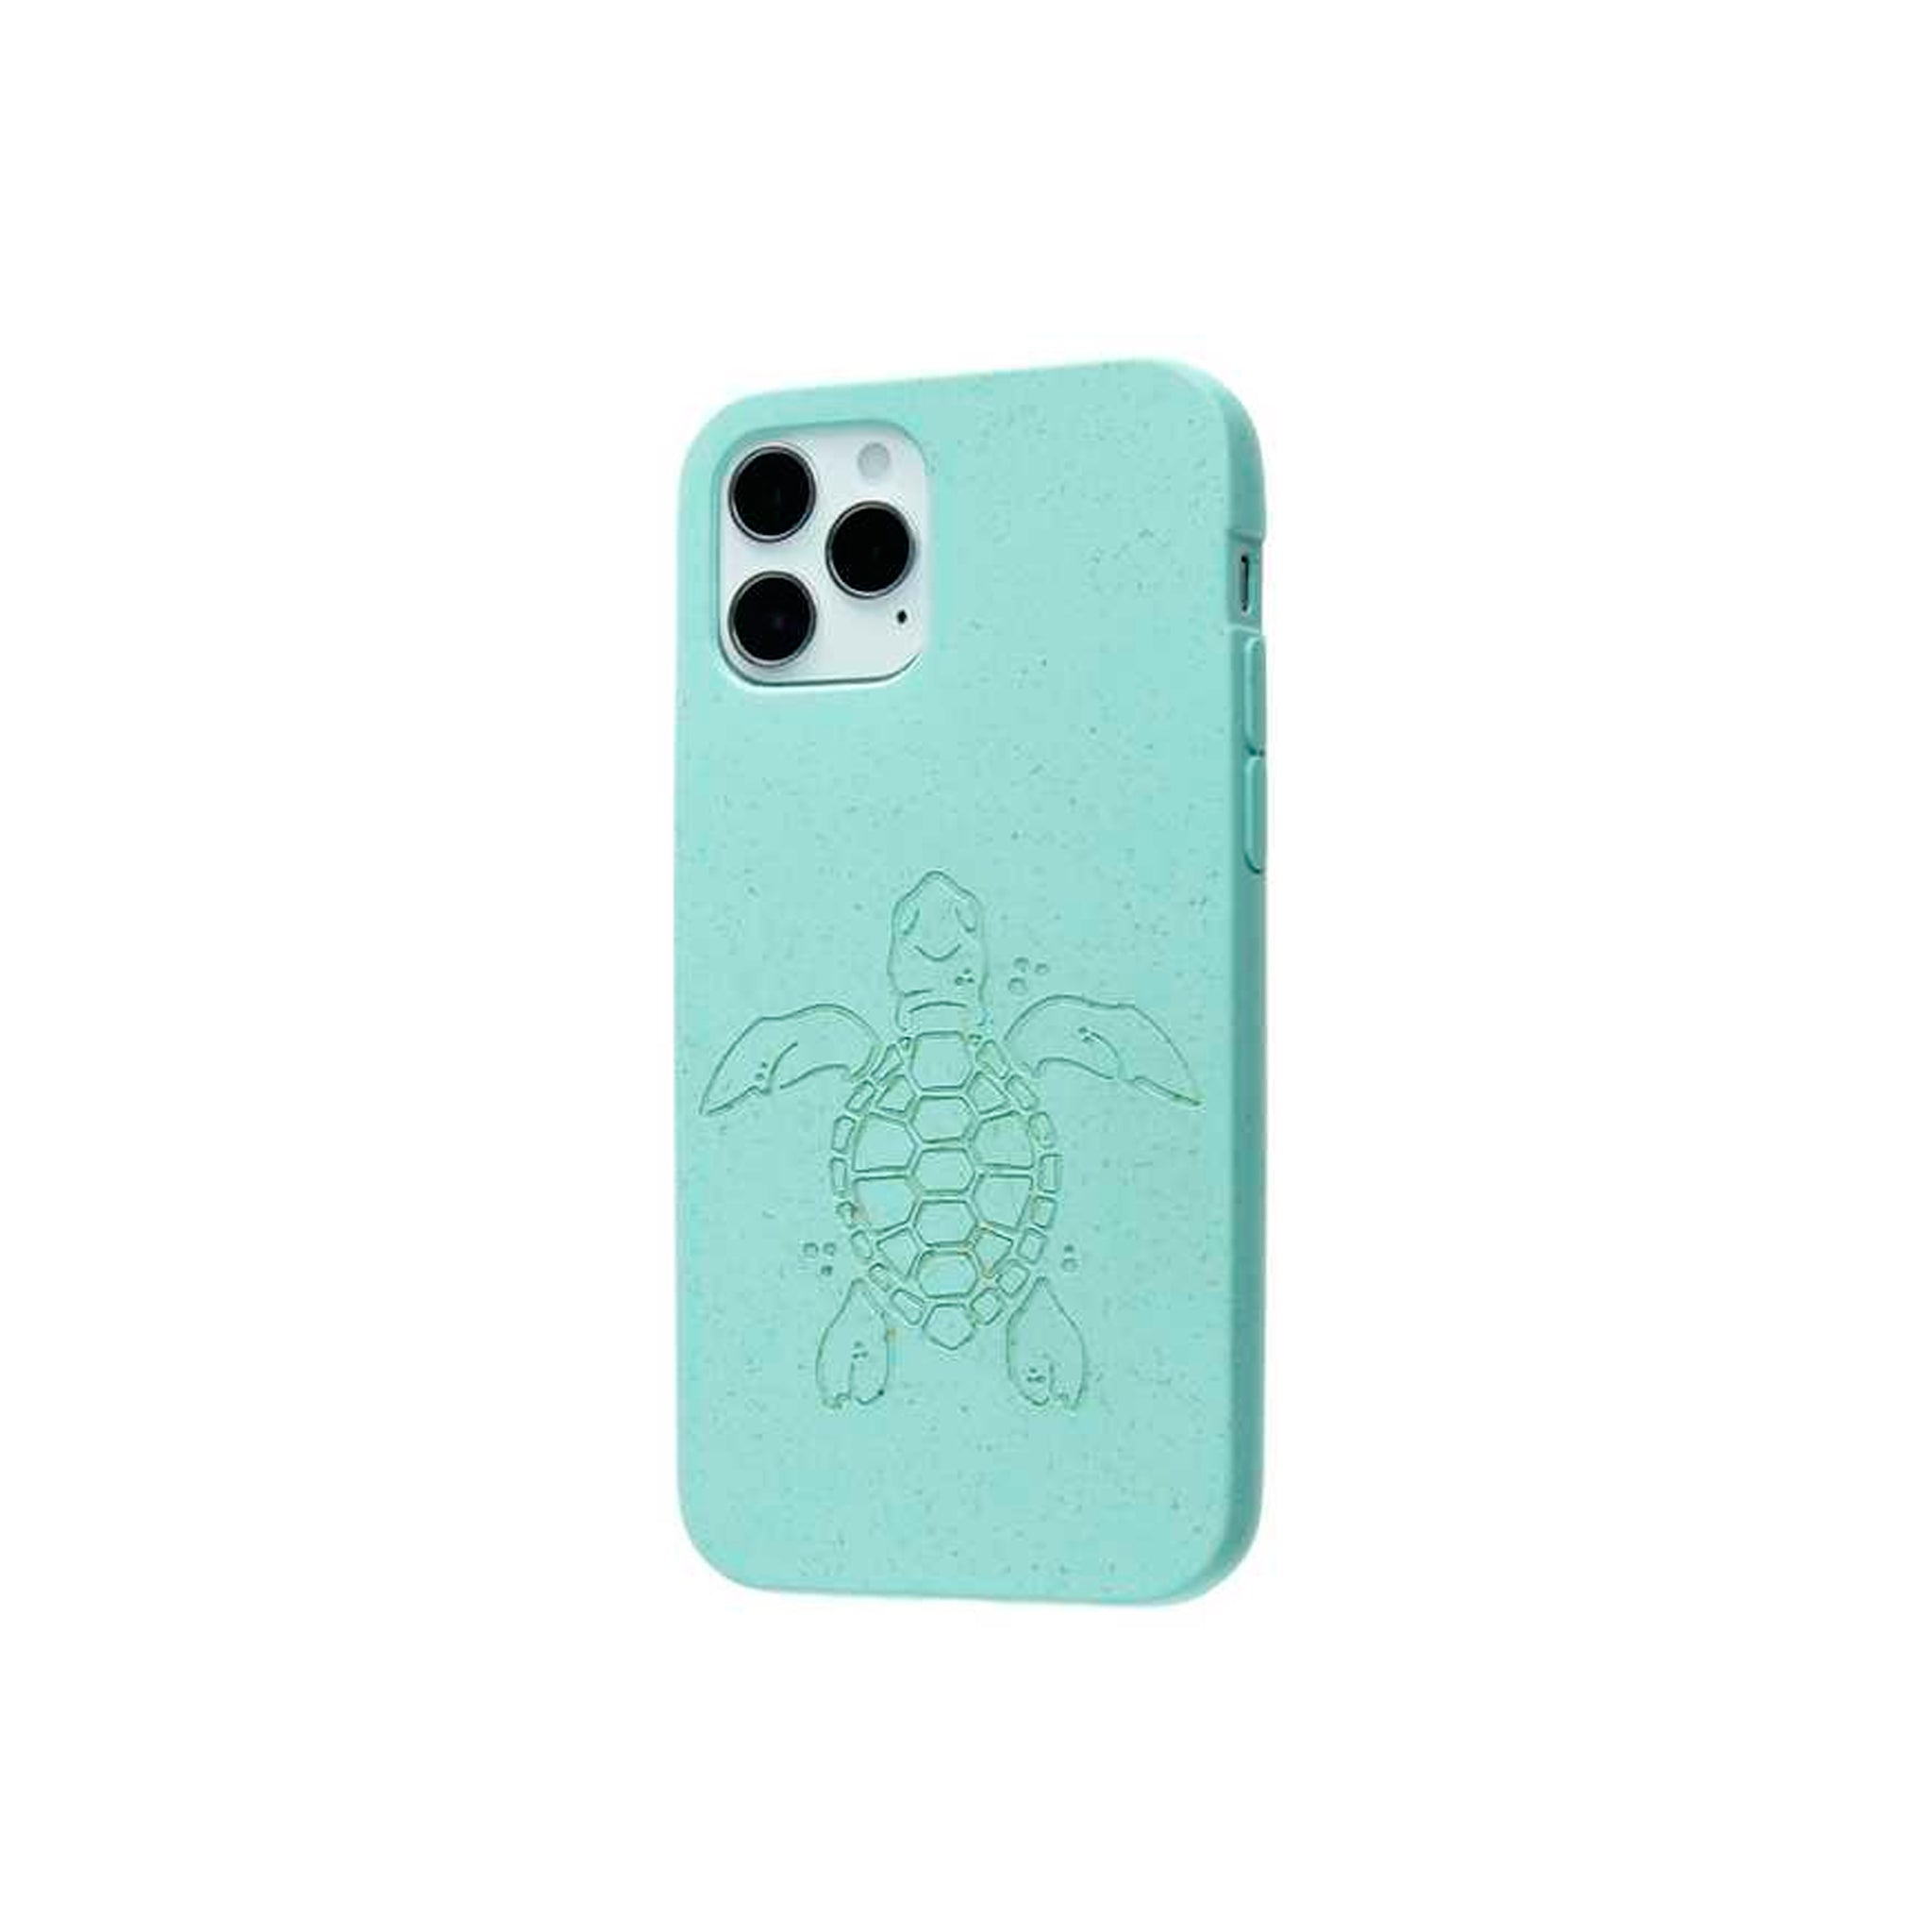 Pela - Eco Friendly Case For Apple Iphone 12 / 12 Pro - Ocean Turquoise Turtle Edition